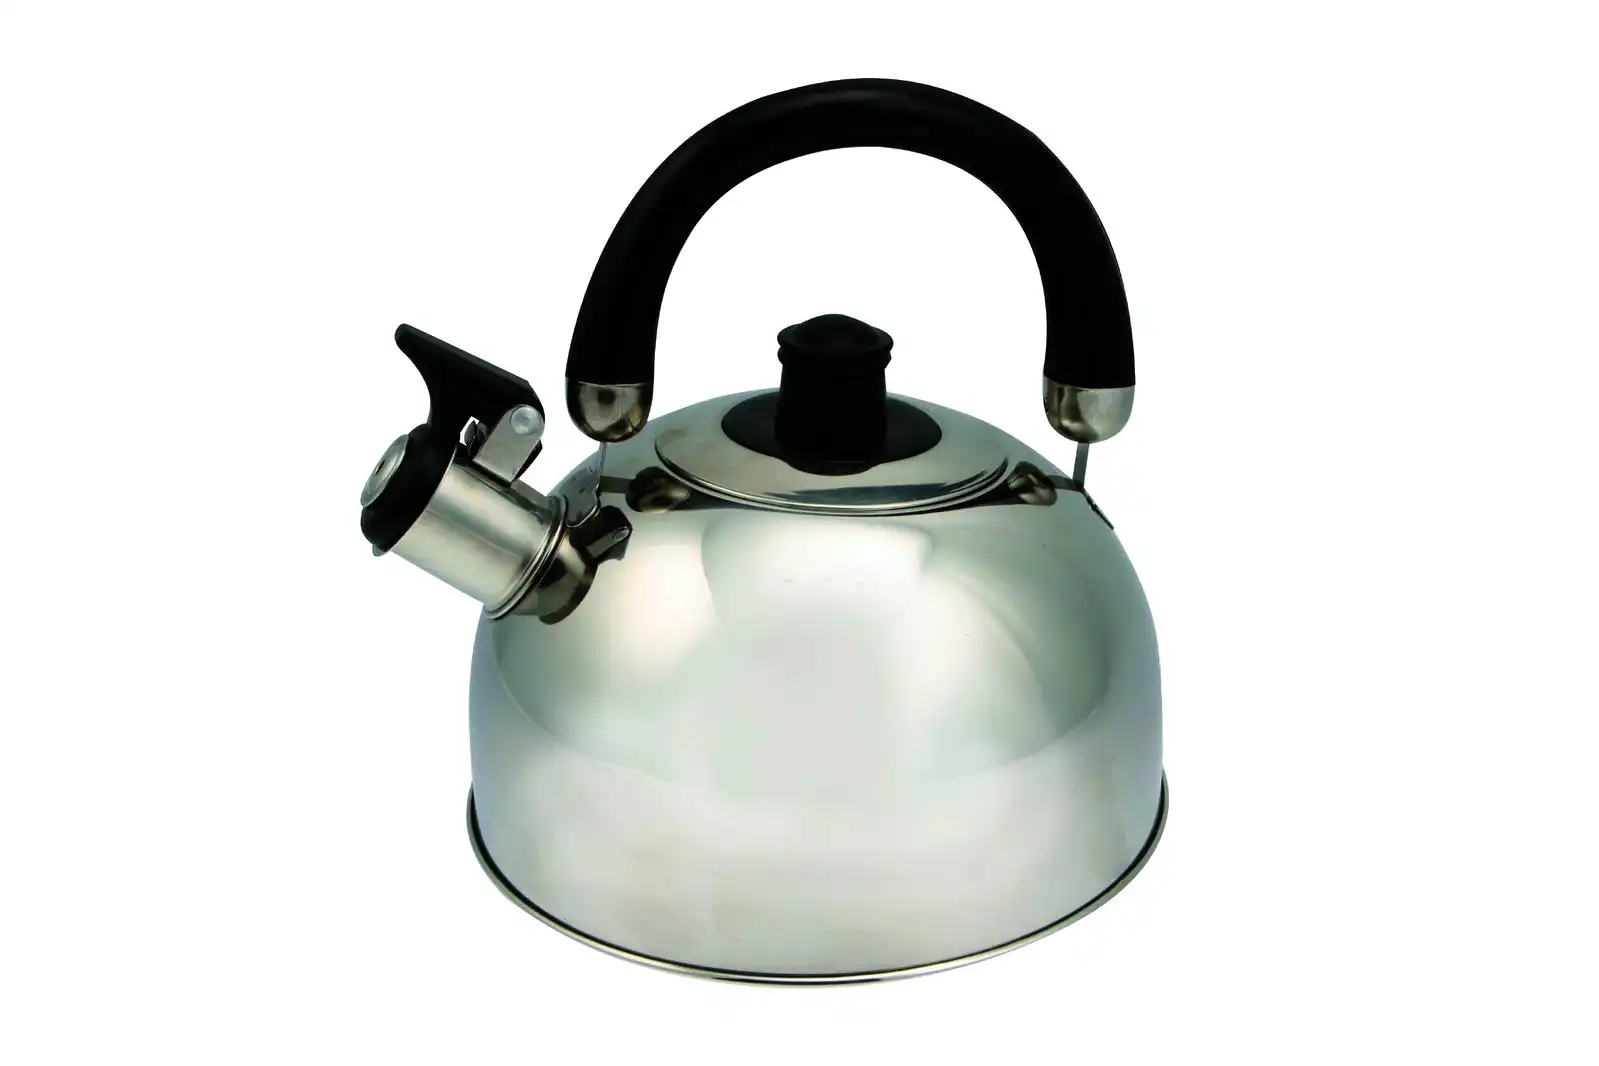 Cockatoo Camping 2L Stainless Steel Whistling Kettle Outdoor Water Boiler Silver